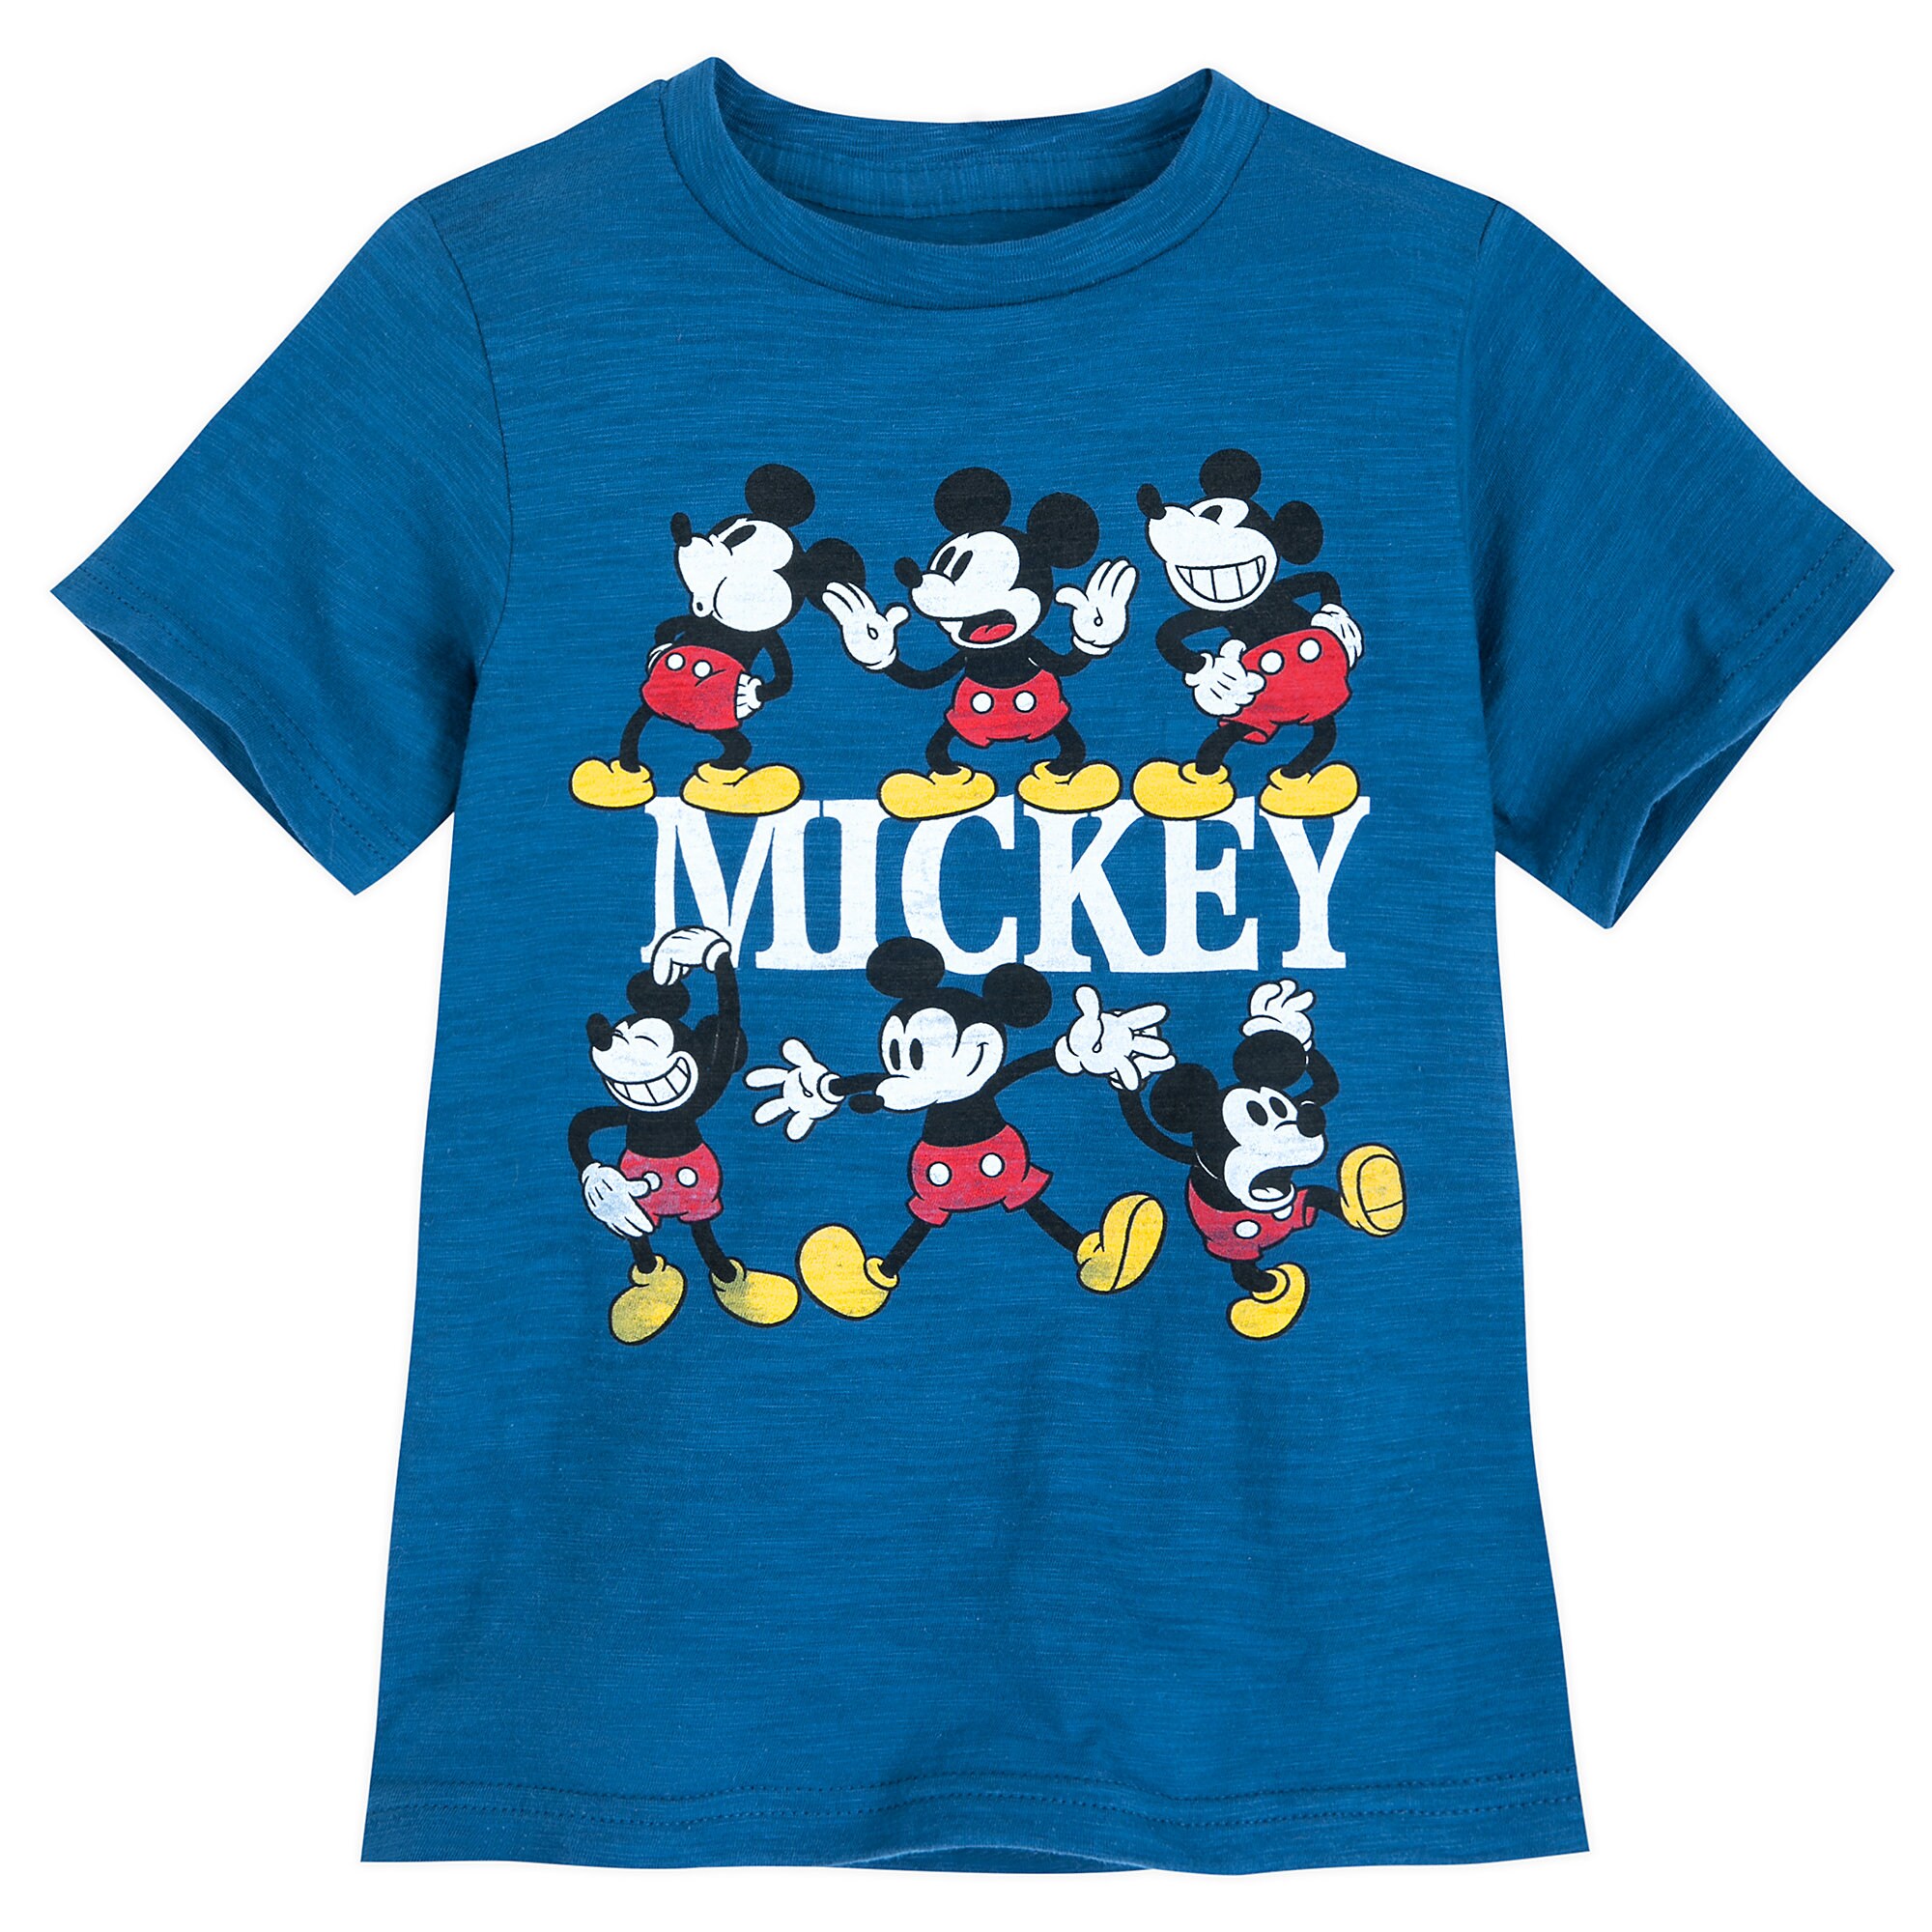 Mickey Mouse Multi-Pose T-Shirt for Boys